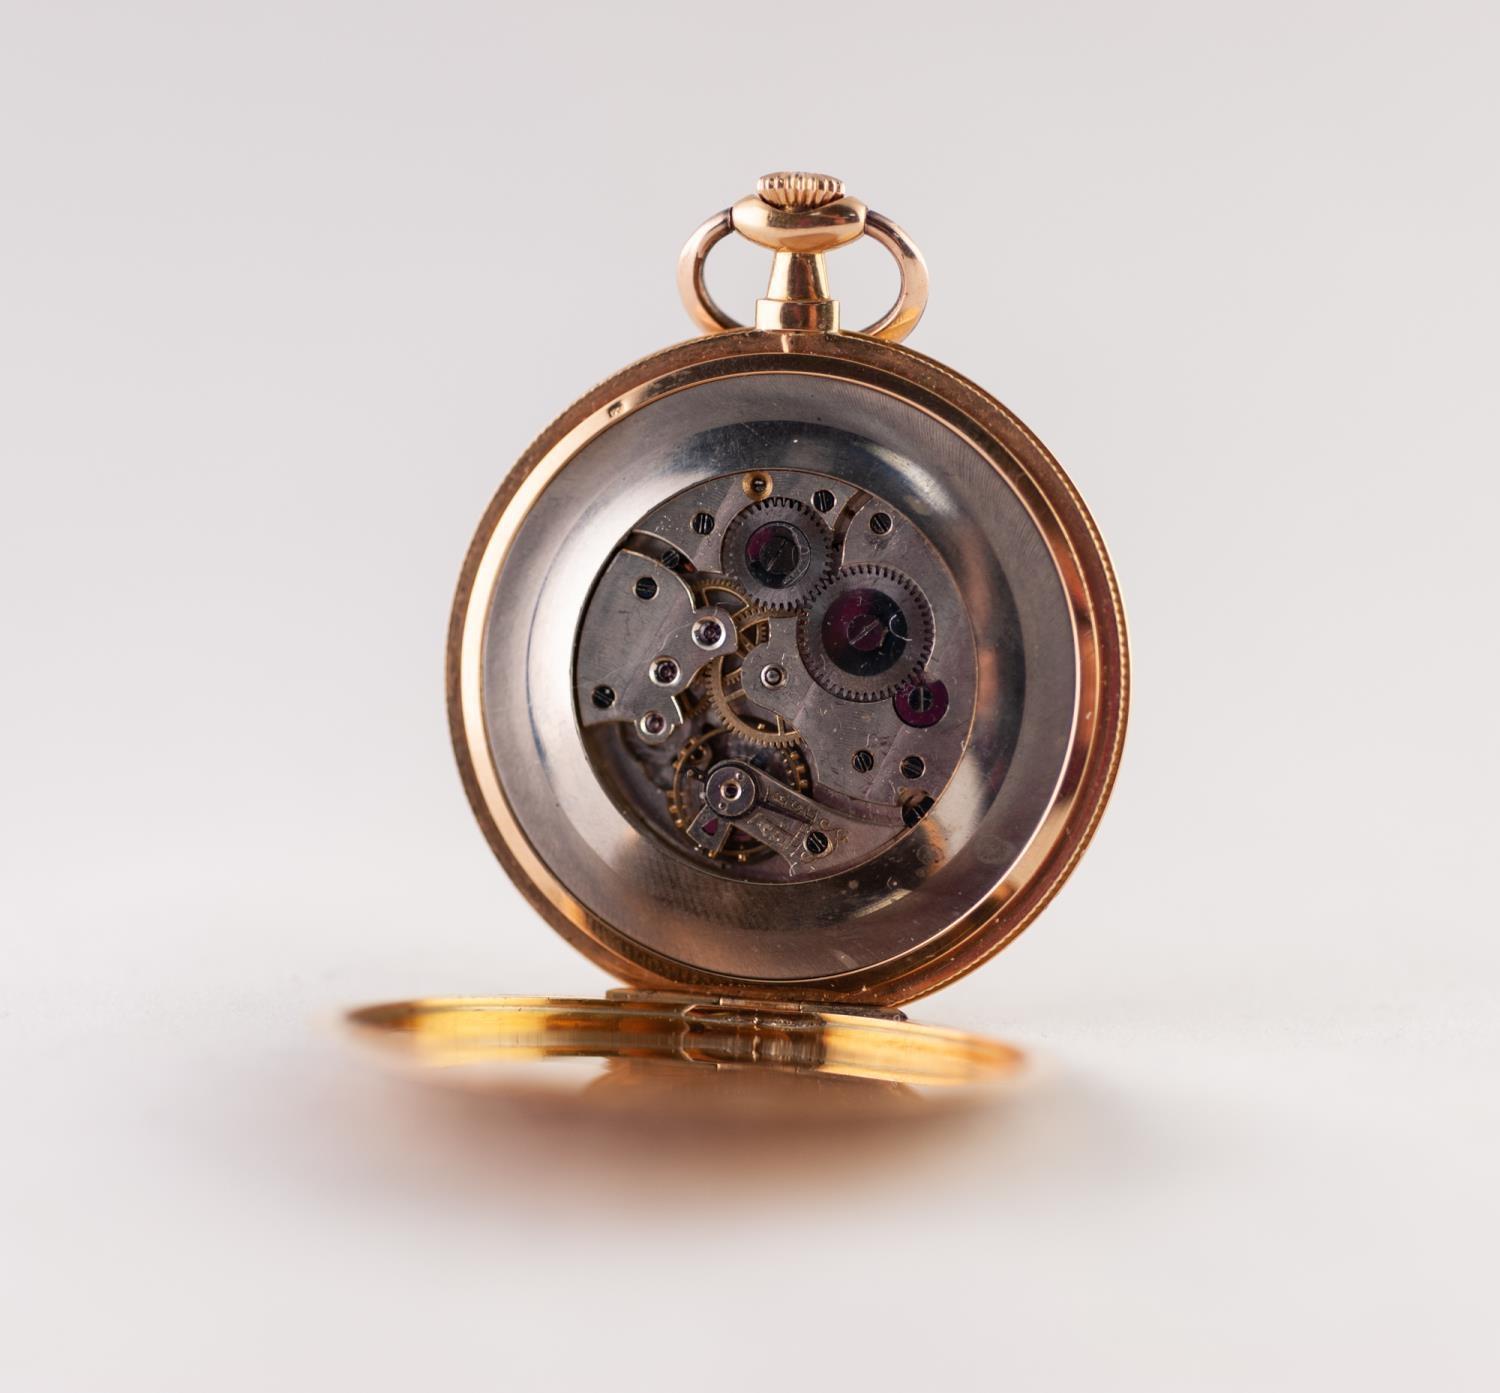 SIRIUS 18k GOLD SLIM DRESS POCKET WATCH with keyless movement, silvered arabic dial, discus shaped - Image 3 of 3